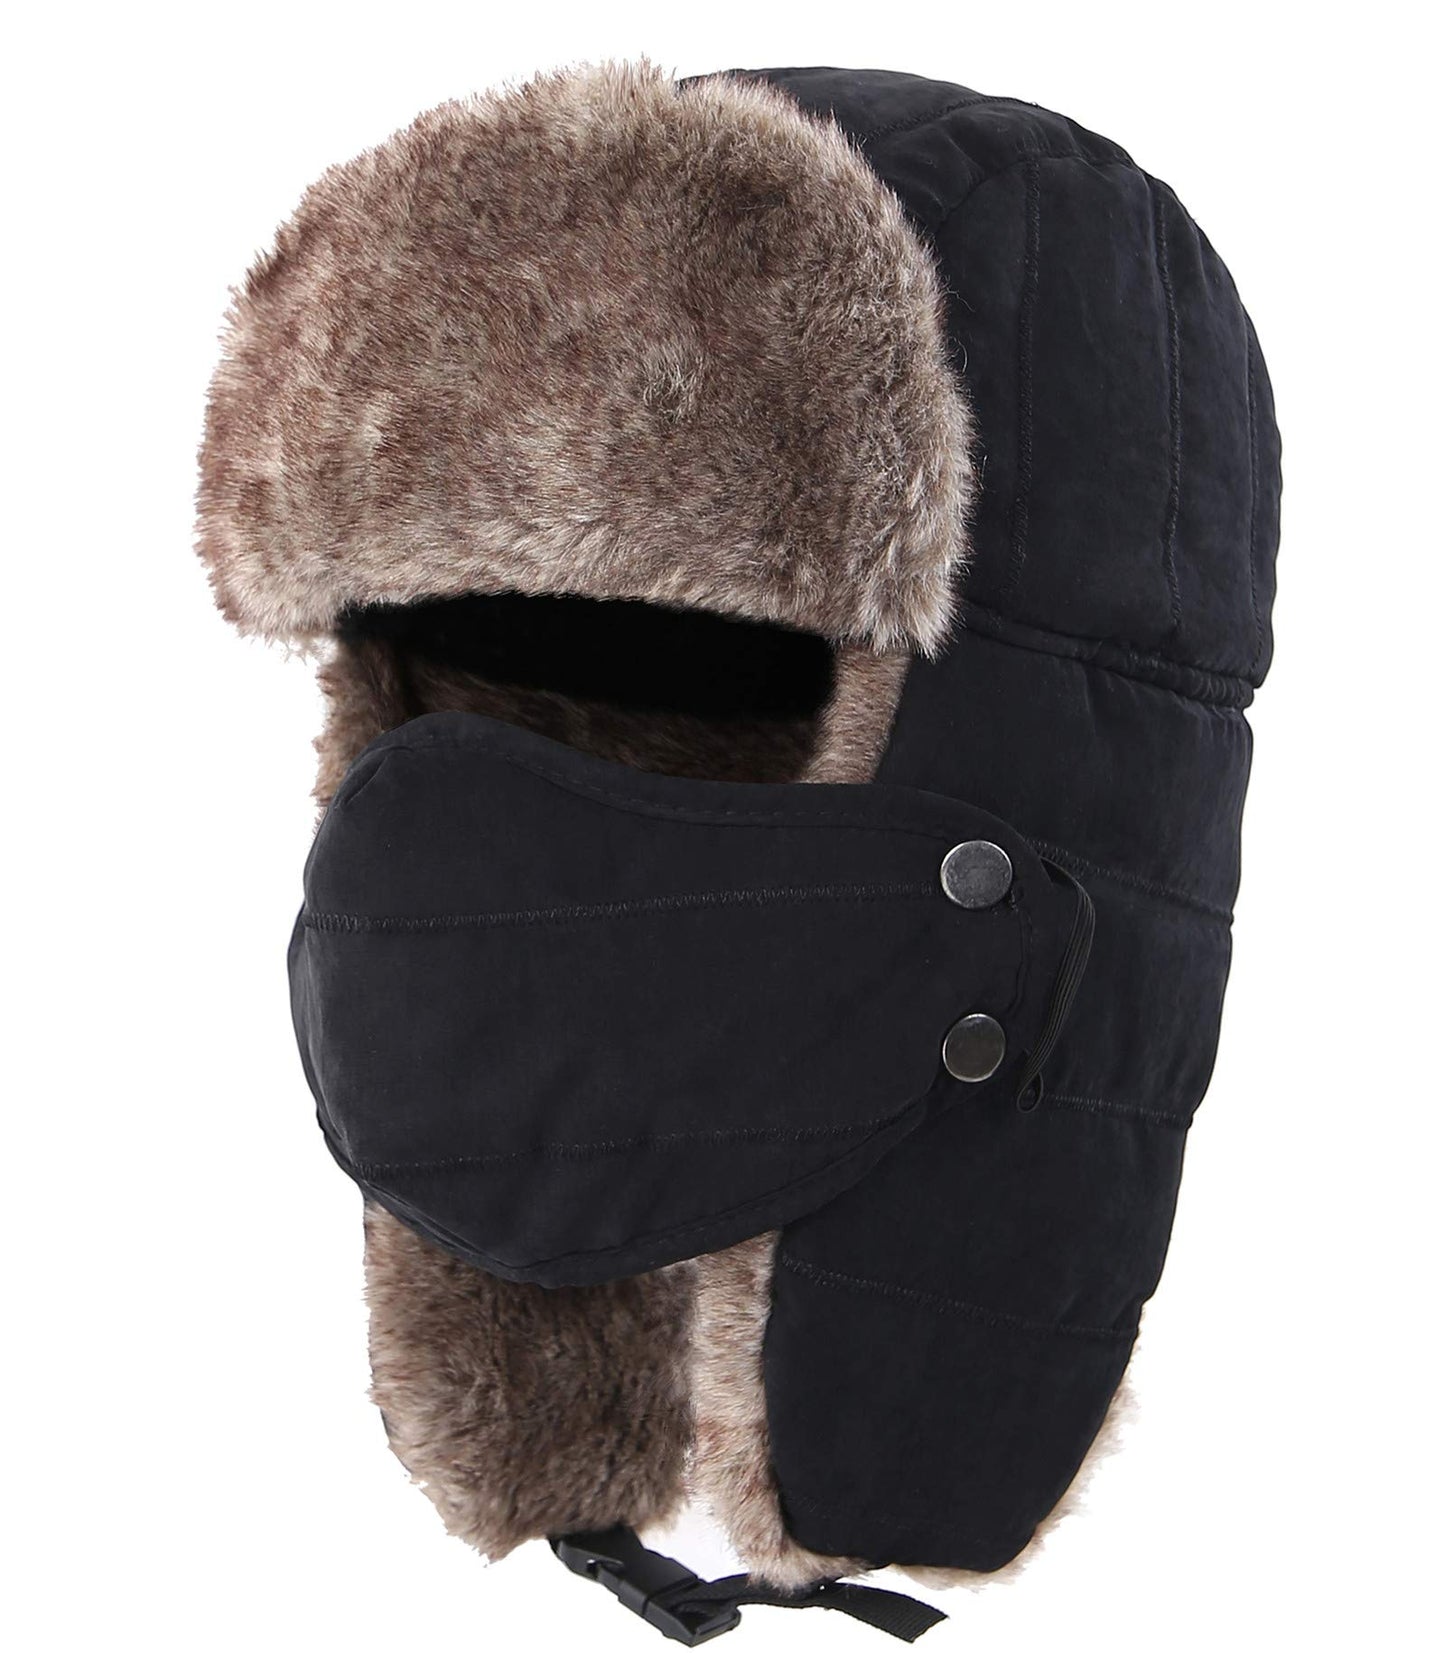 Hat Warm Winter Hunting Hats with Ear Flaps Mask